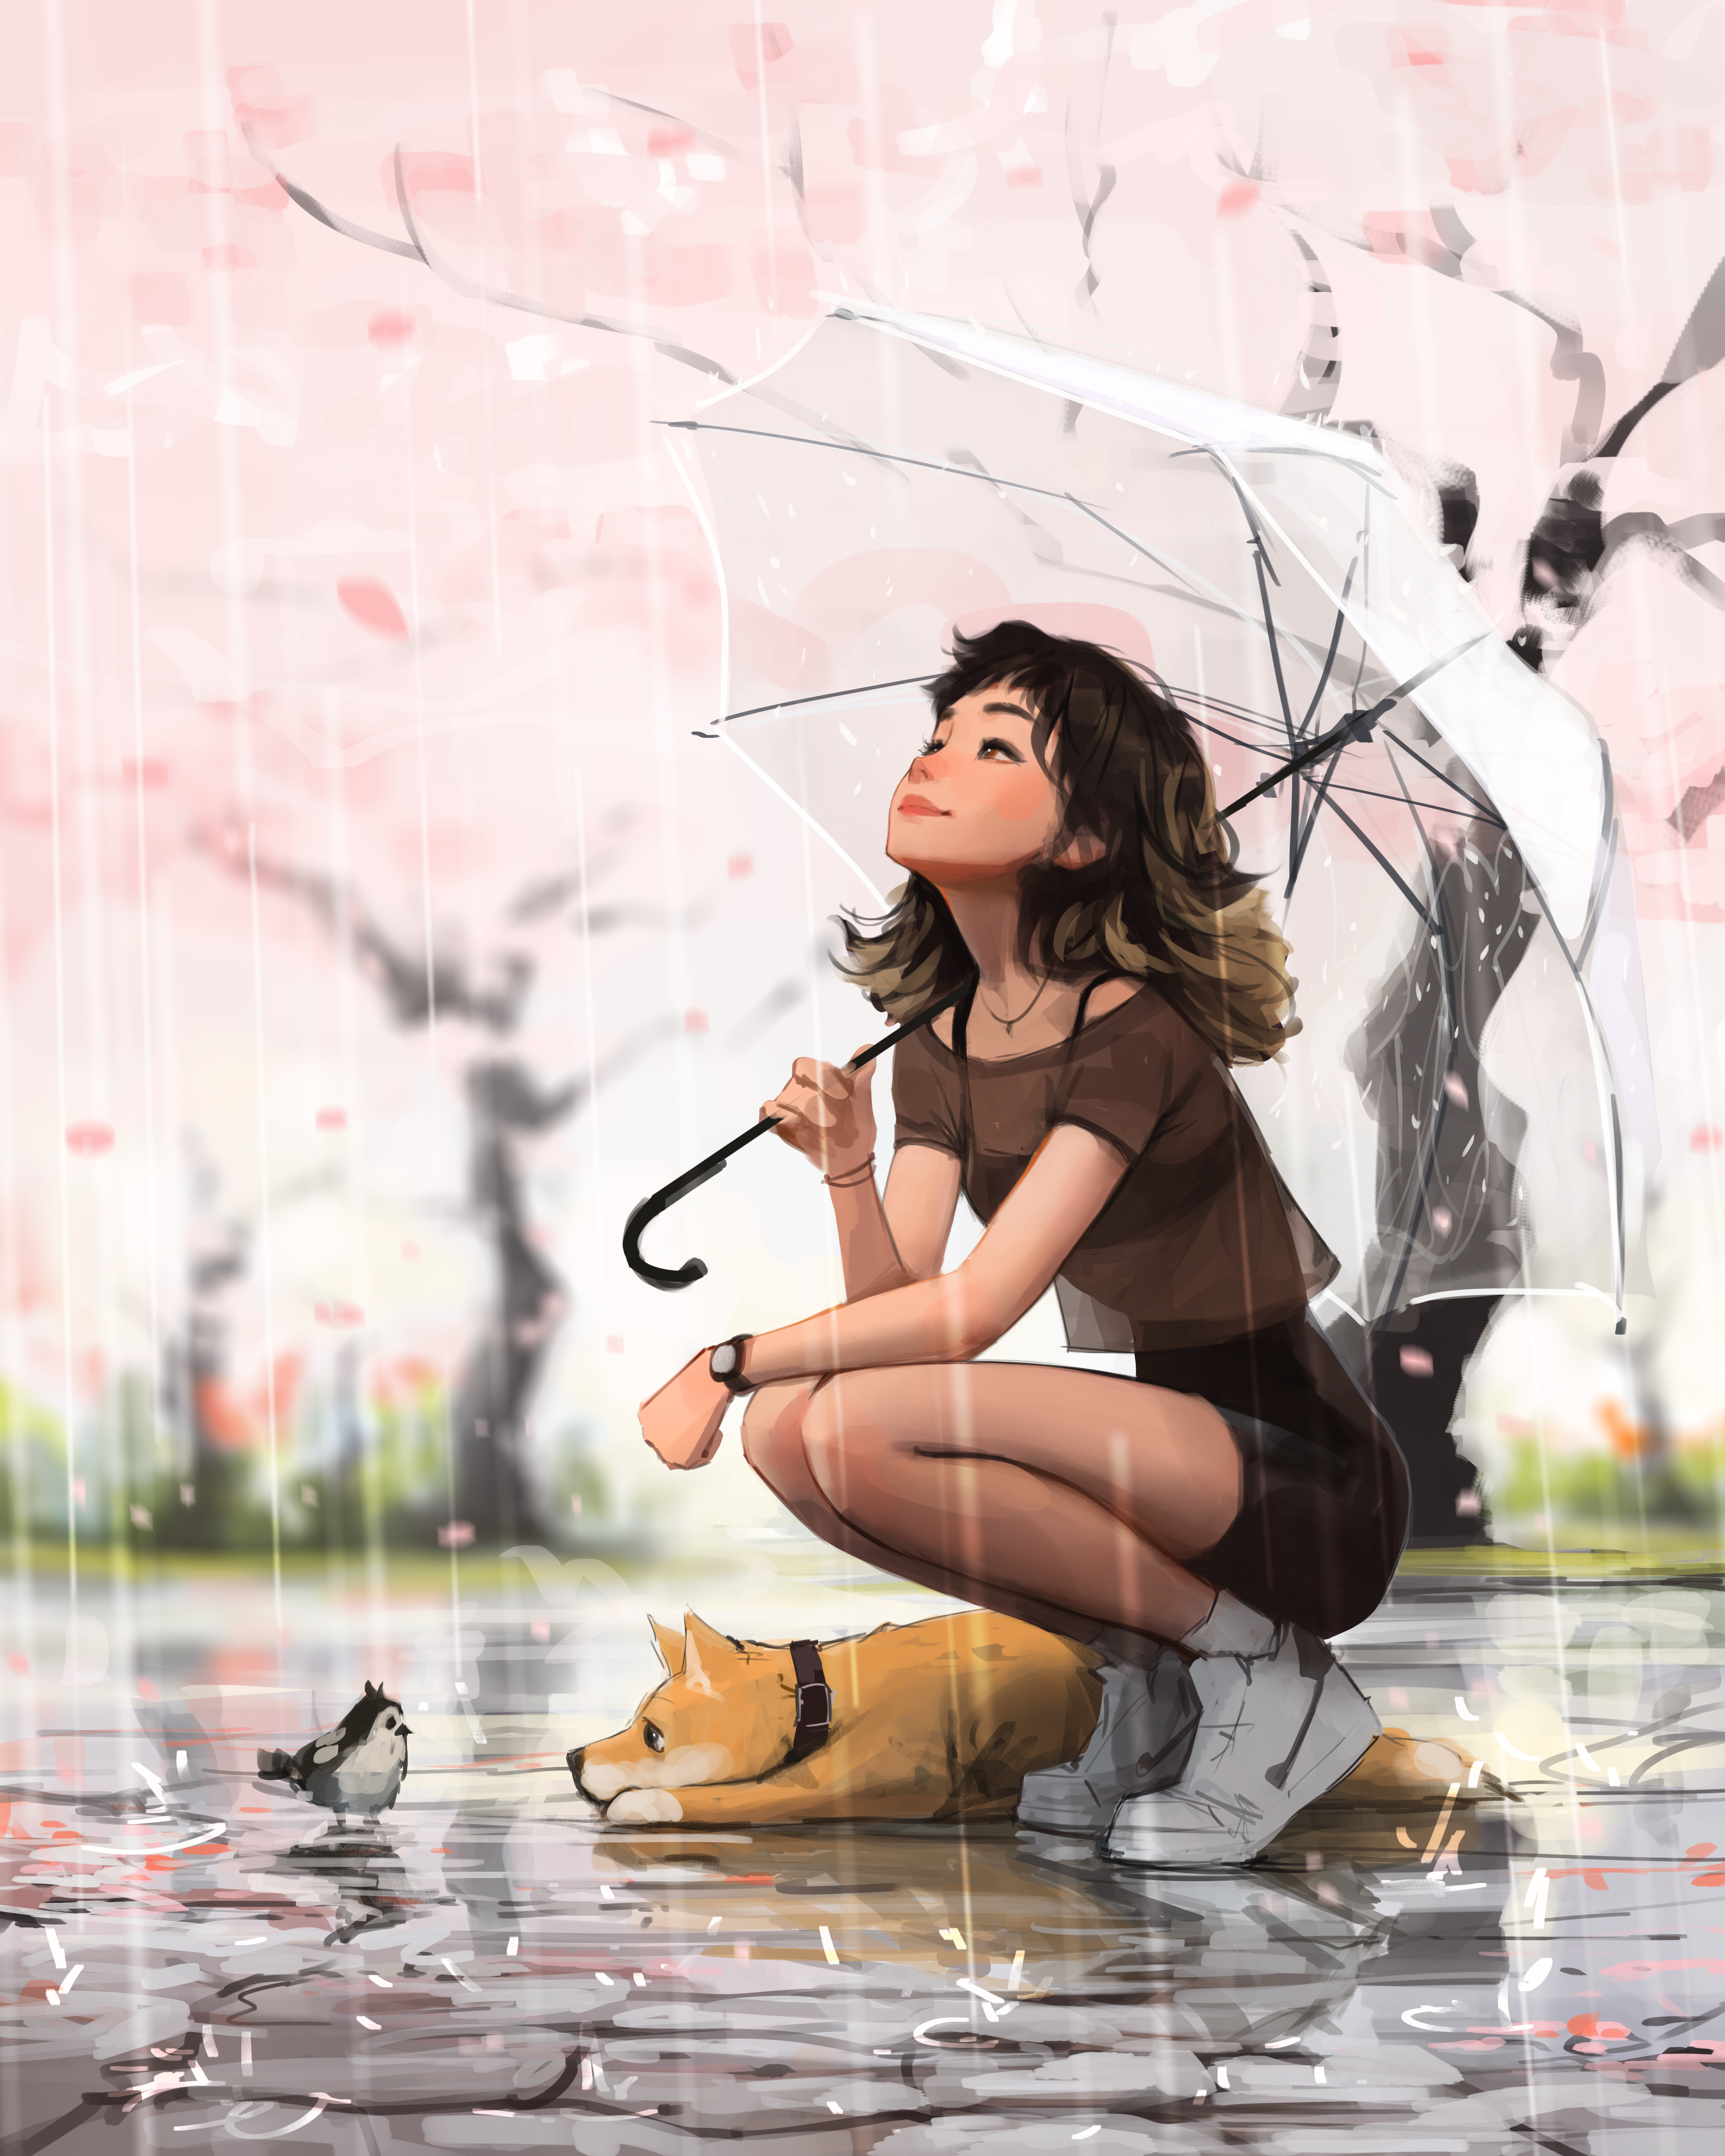 General 4320x5400 Sam Yang cherry blossom umbrella dog rain squatting portrait display smiling shoes birds blurred blurry background petals shoulder length hair animals reflection looking up closed mouth brunette brown eyes trees digital art